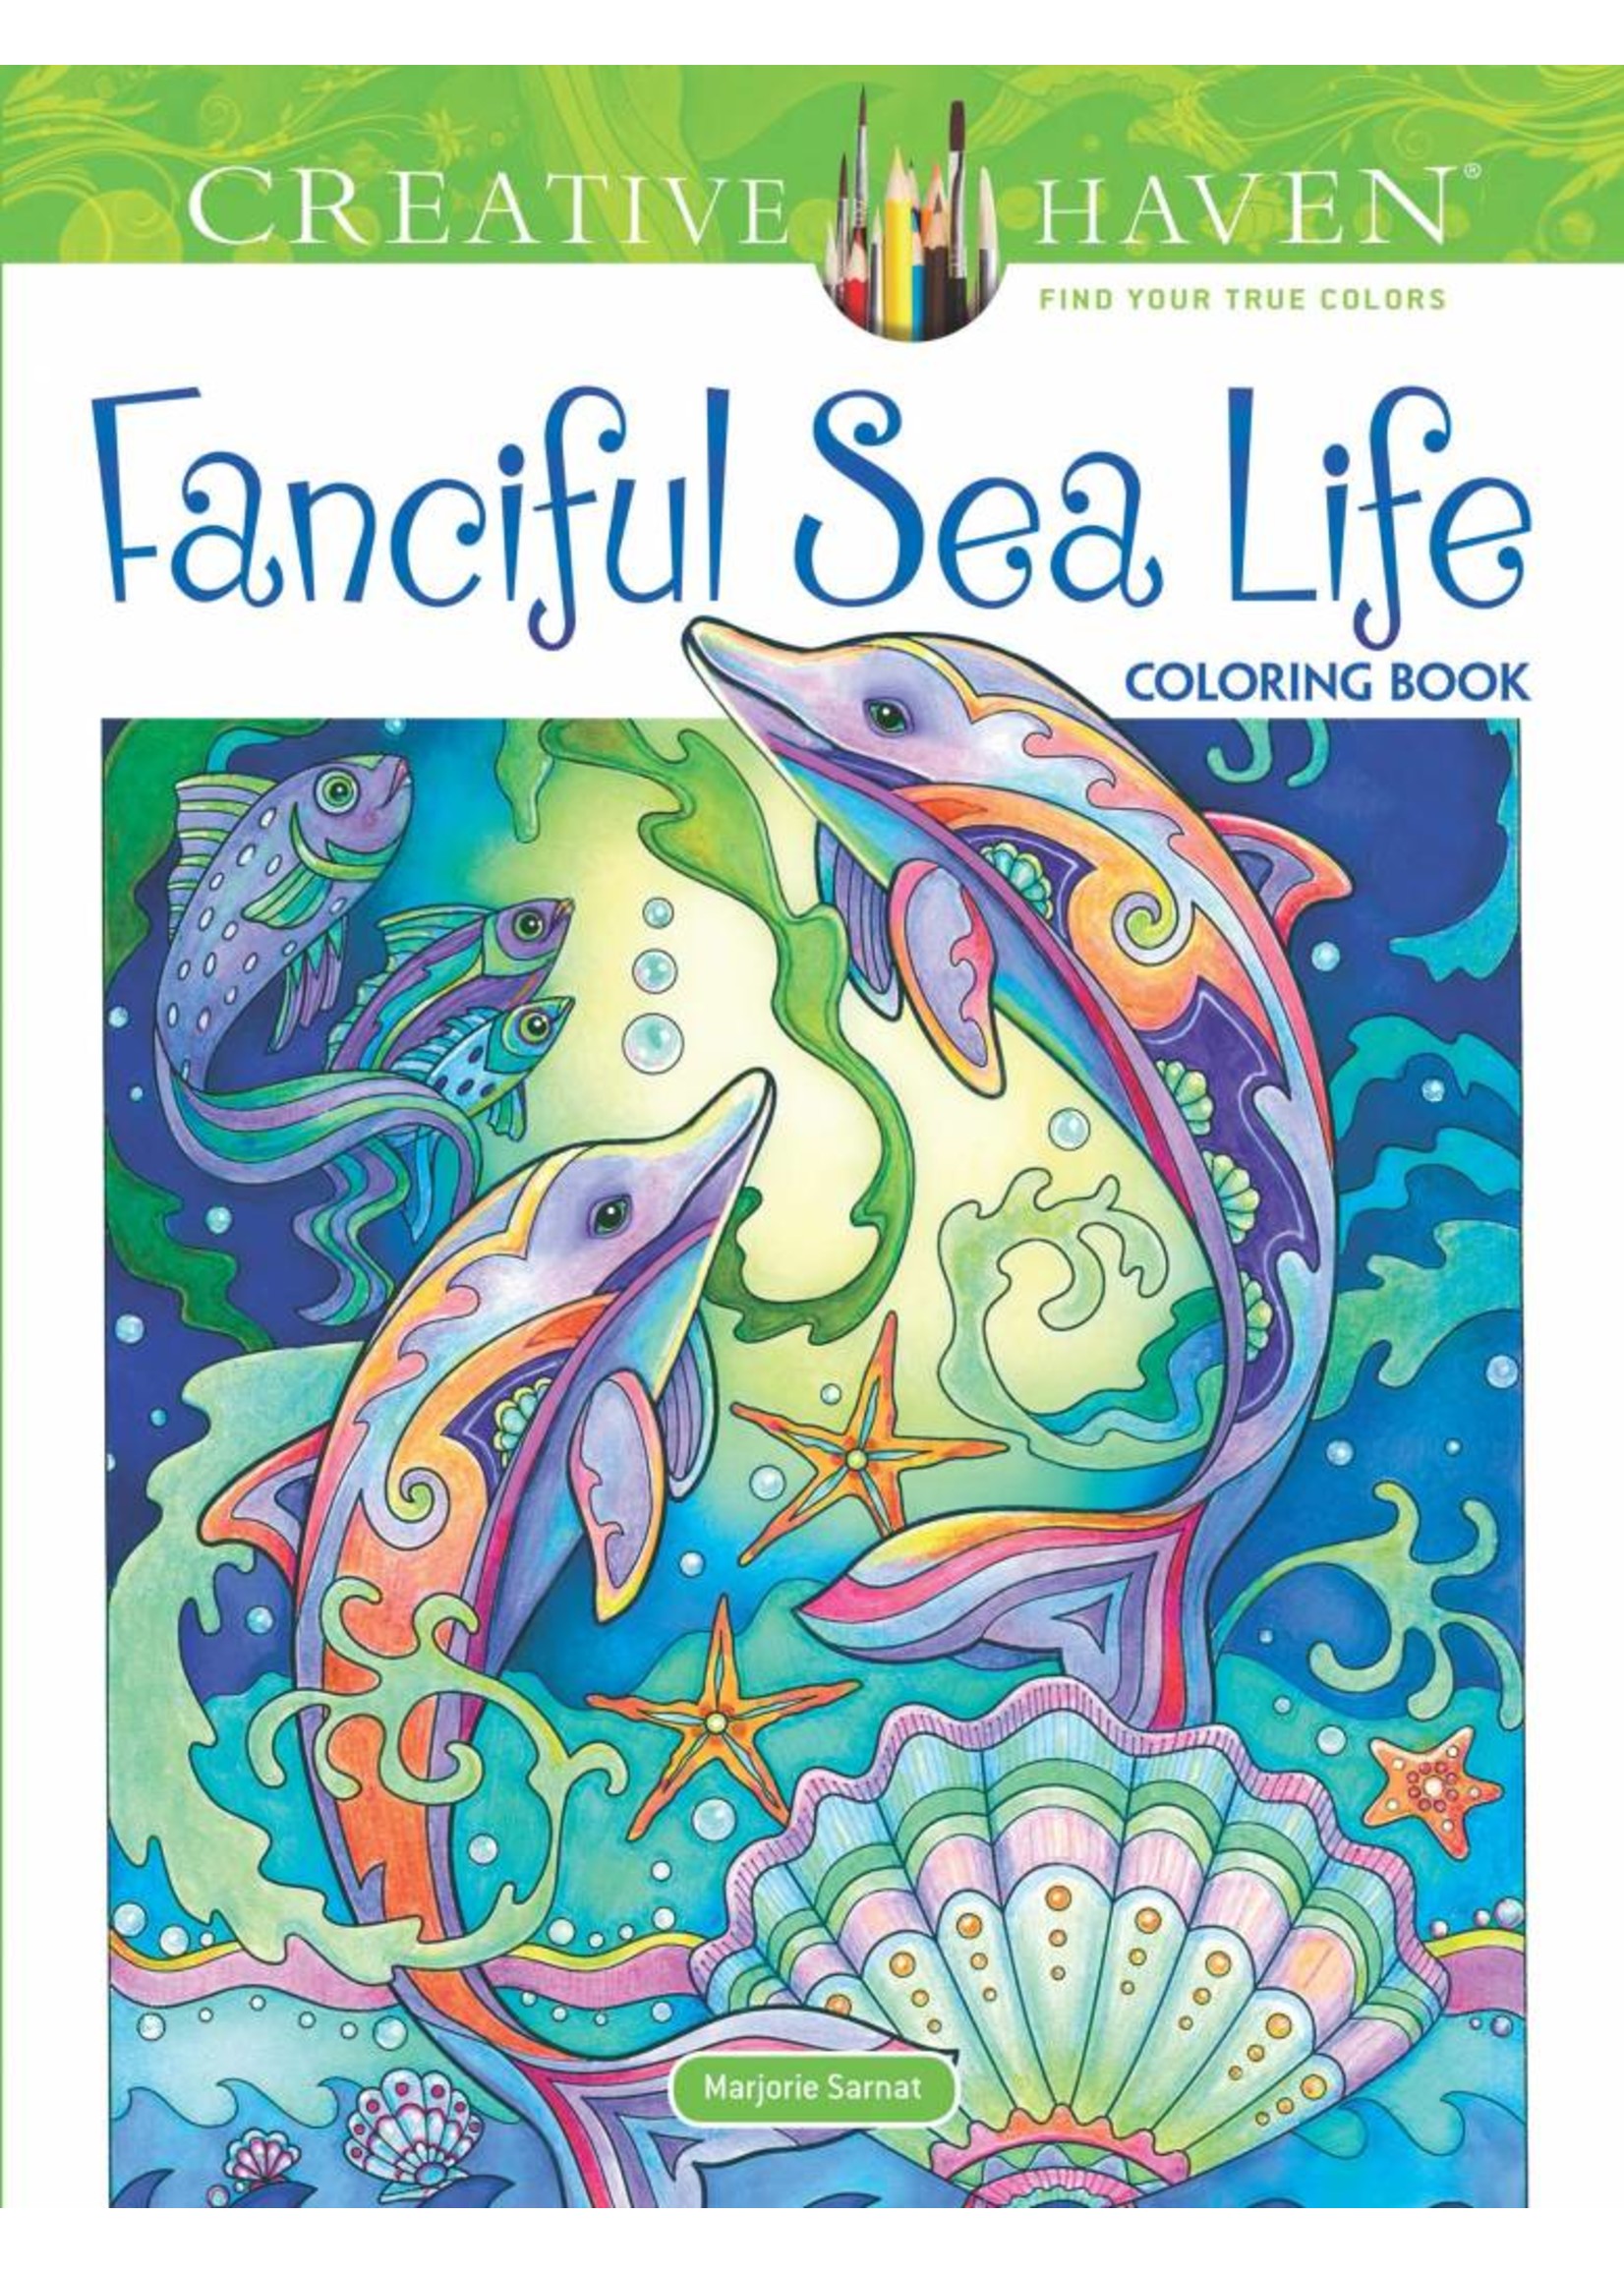 Fanciful Sea Life Adult Coloring Book